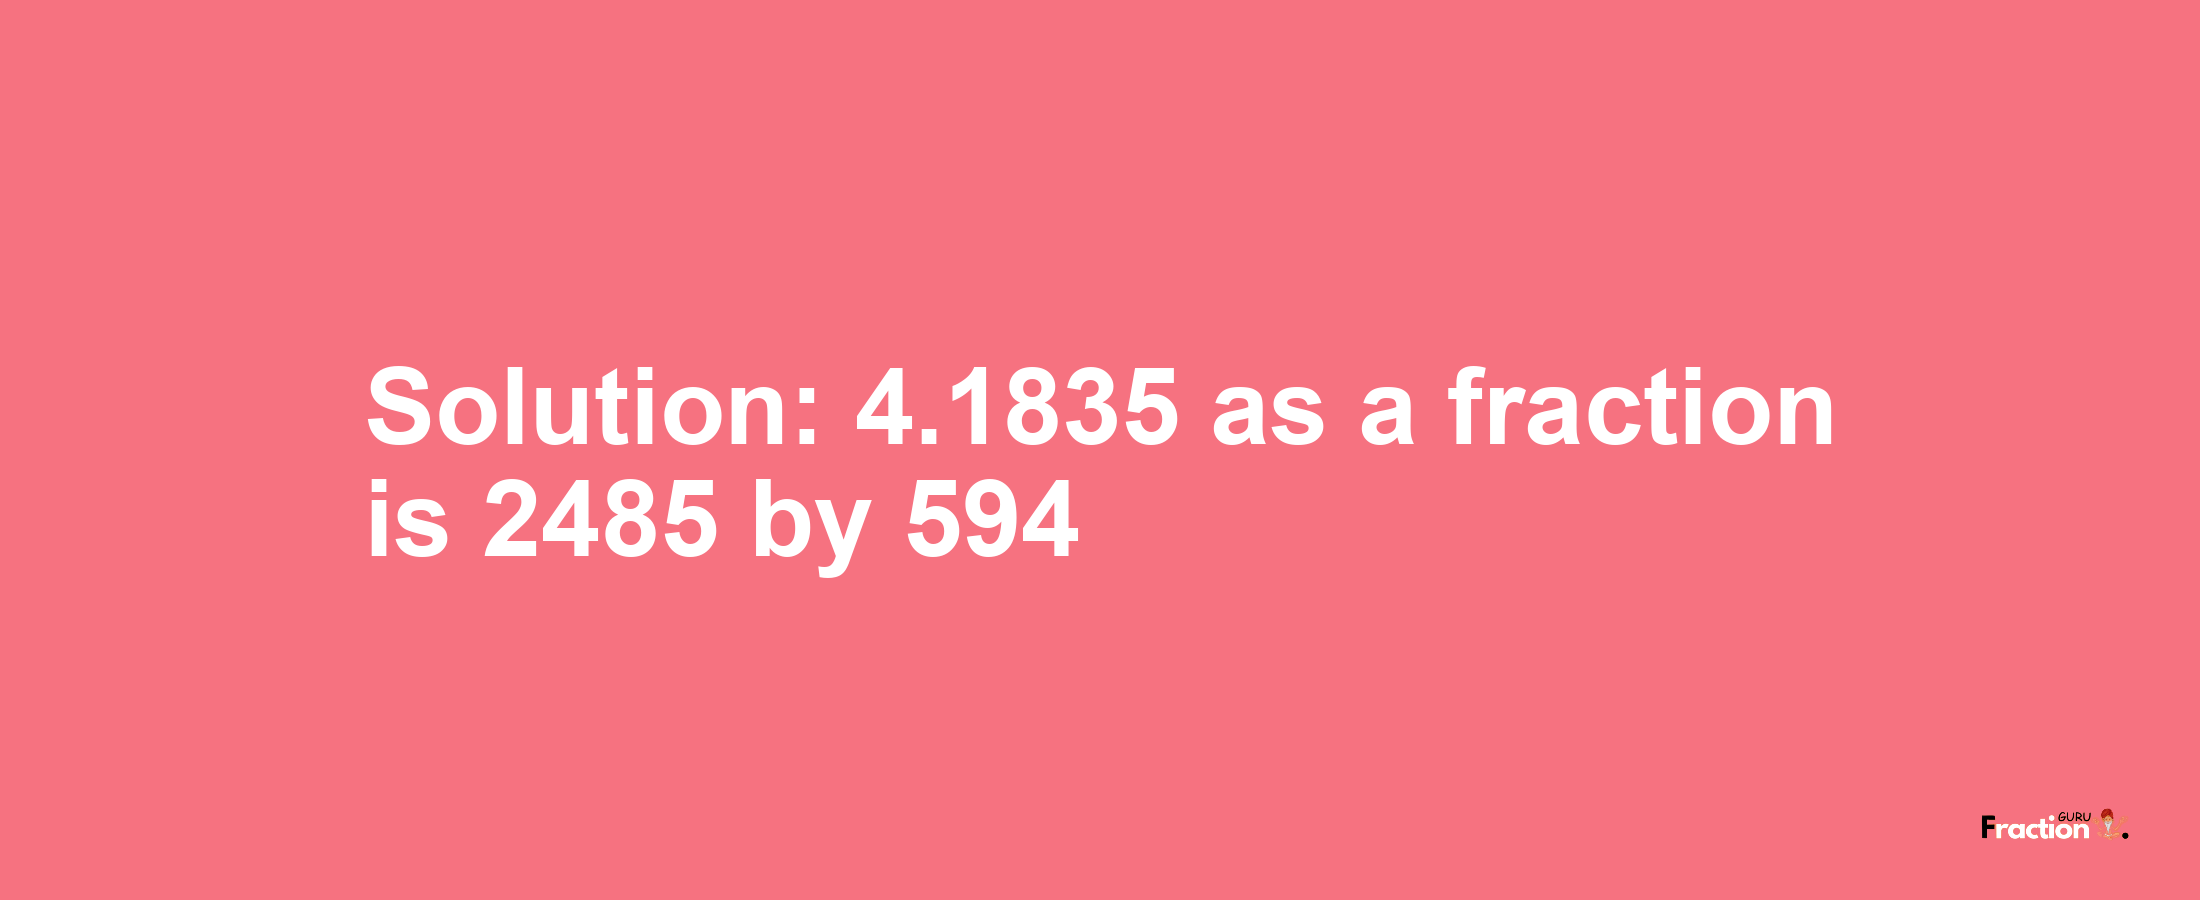 Solution:4.1835 as a fraction is 2485/594